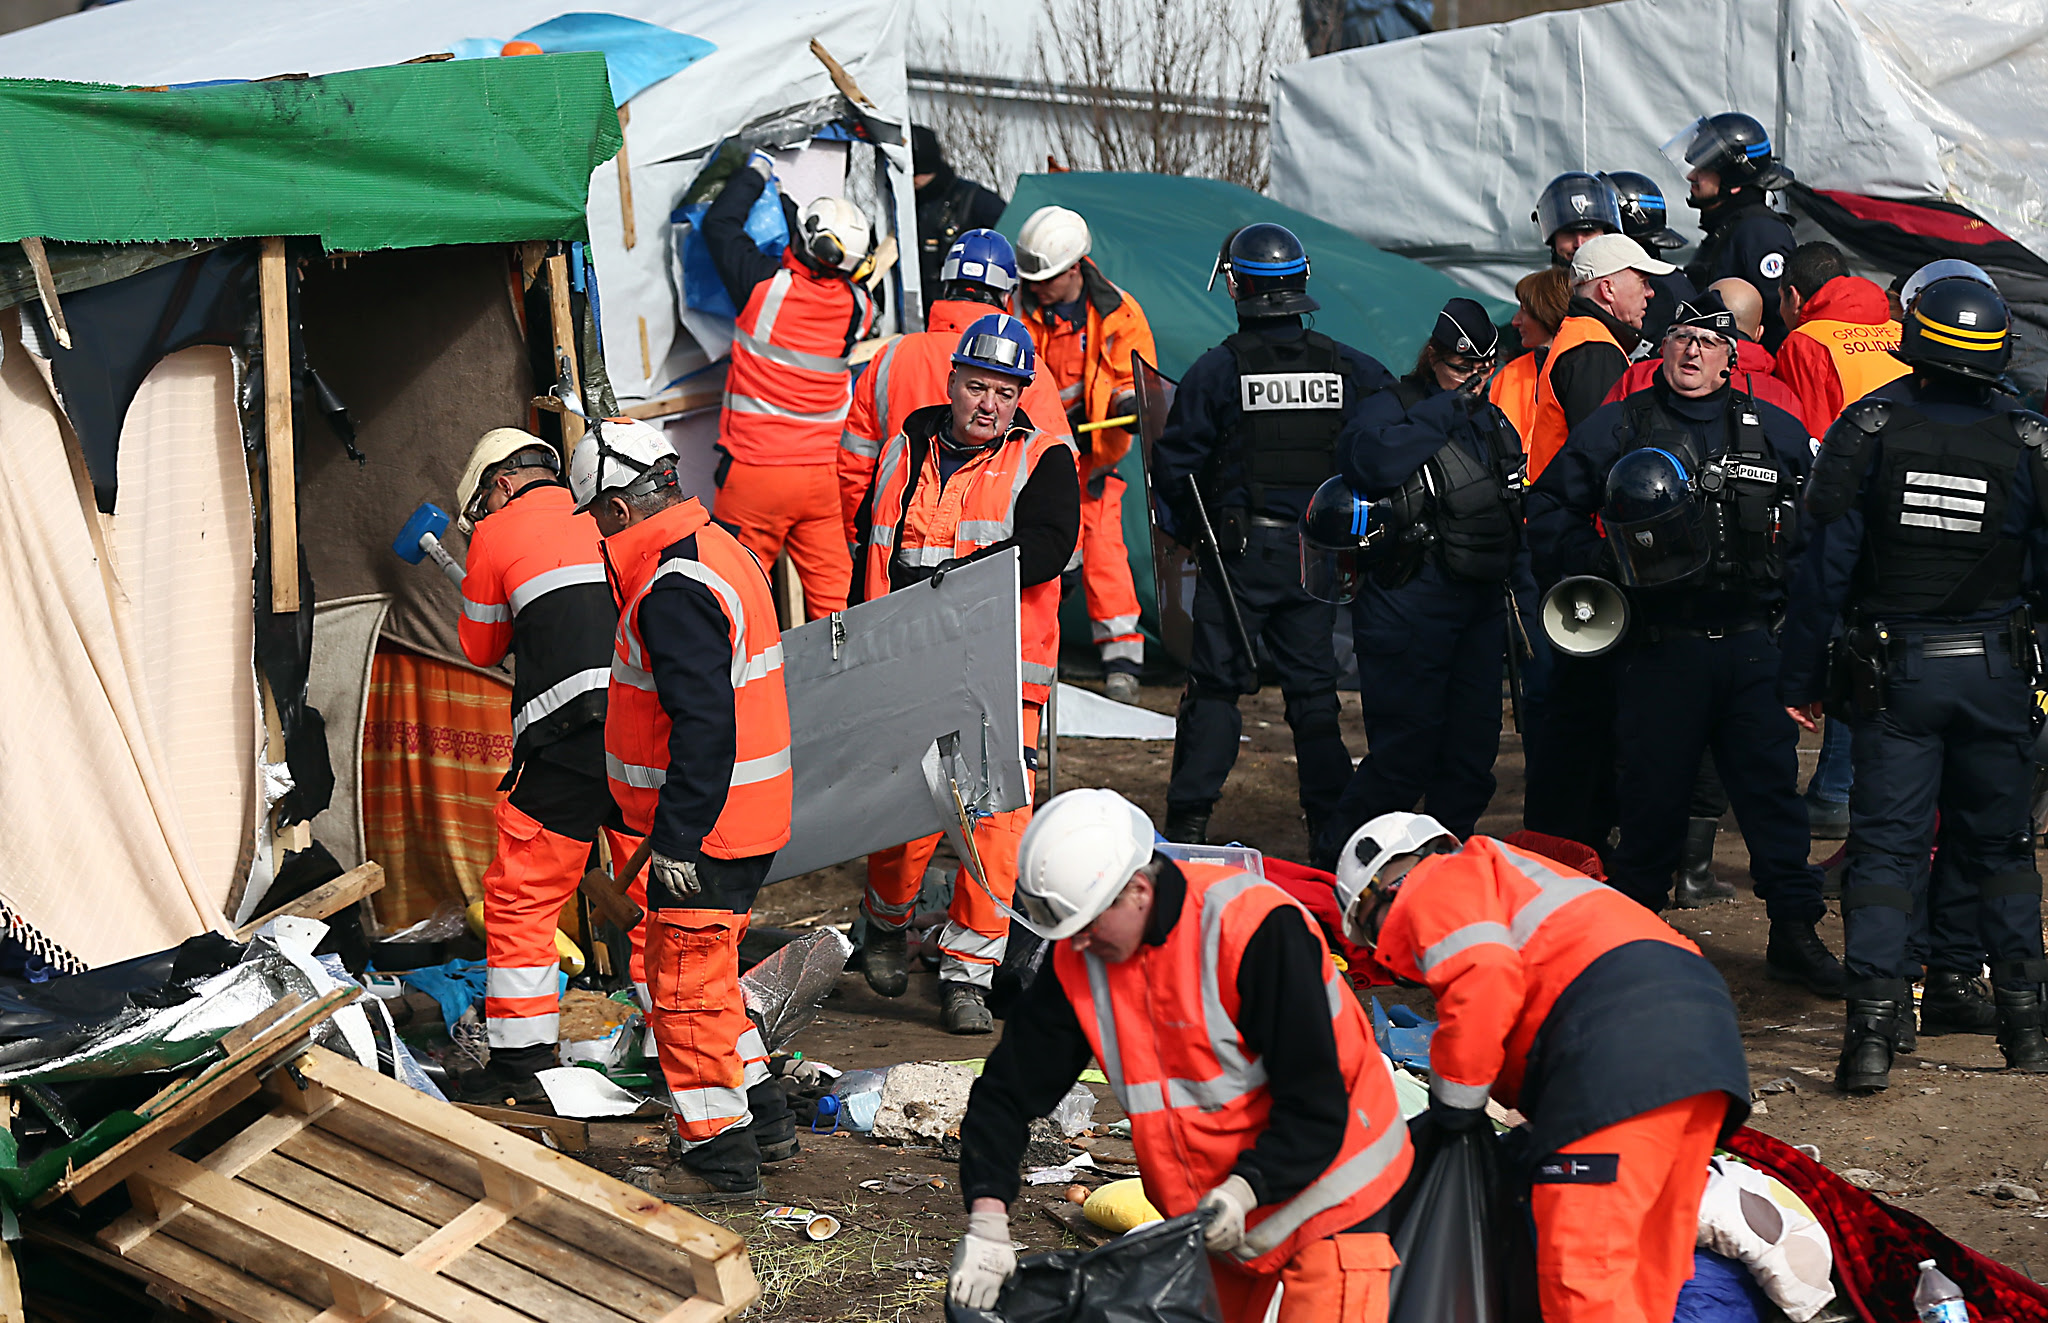 Destruction Of Calais Jungle Camp Begins...CALAIS, FRANCE - FEBRUARY 29:  Workers and police officers clear part of the 'jungle' migrant camp on February 29, 2016 in Calais, France  The French authorities have begun dismantling part of the migrant encampment in the northern French town of Calais and relocating people to purpose-built accommodation nearby. 